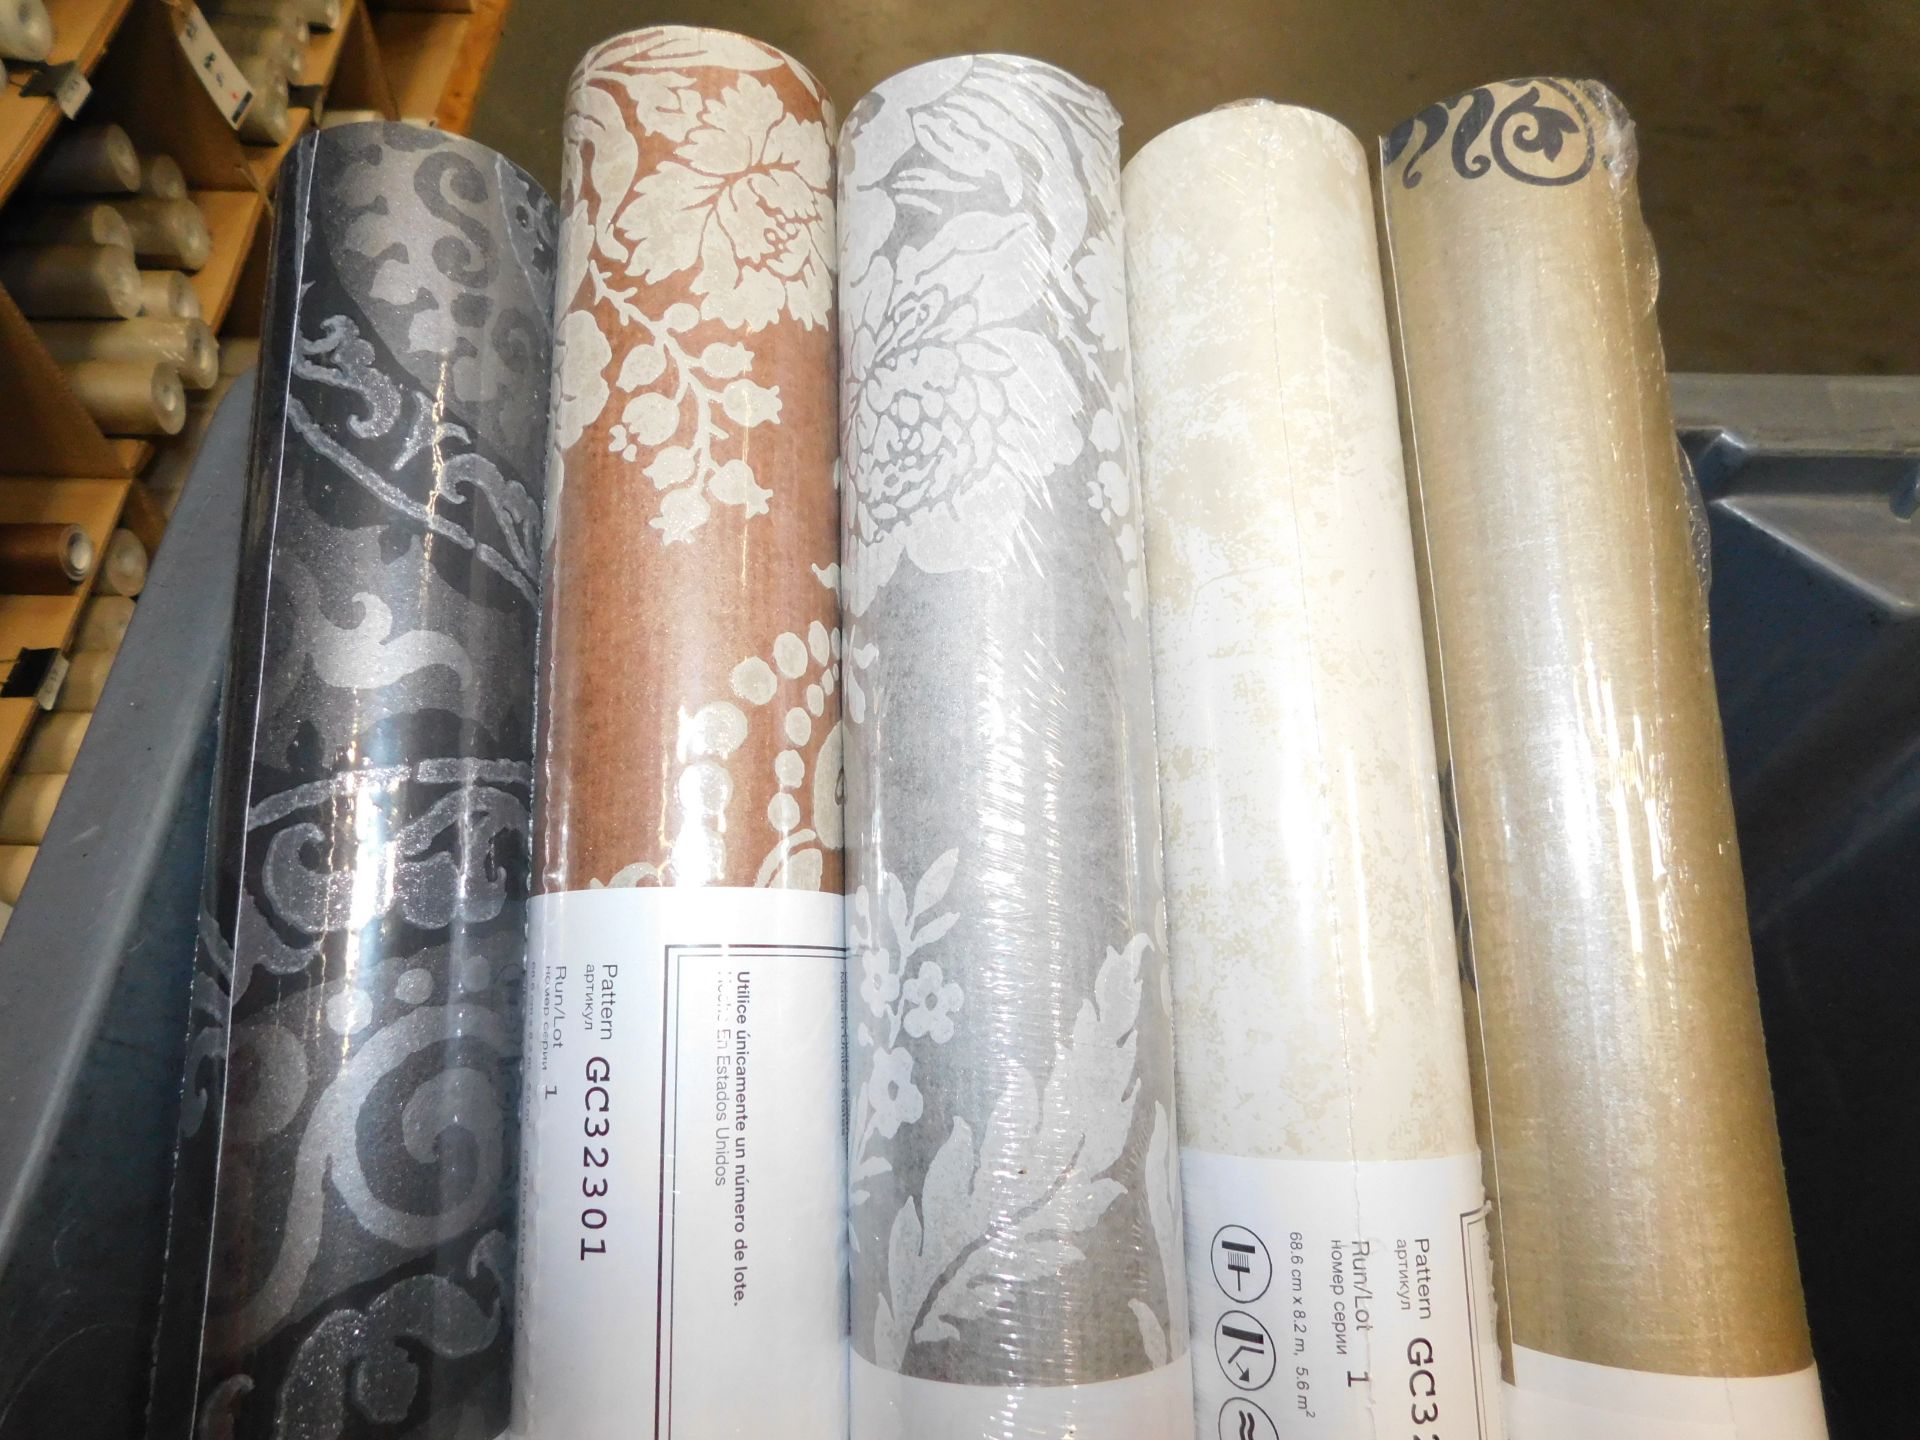 72 Rolls of Monaco 2 Wallpaper (Bays C72 – C85) (Library Images – Some Colours May Not Be Present in - Image 3 of 4